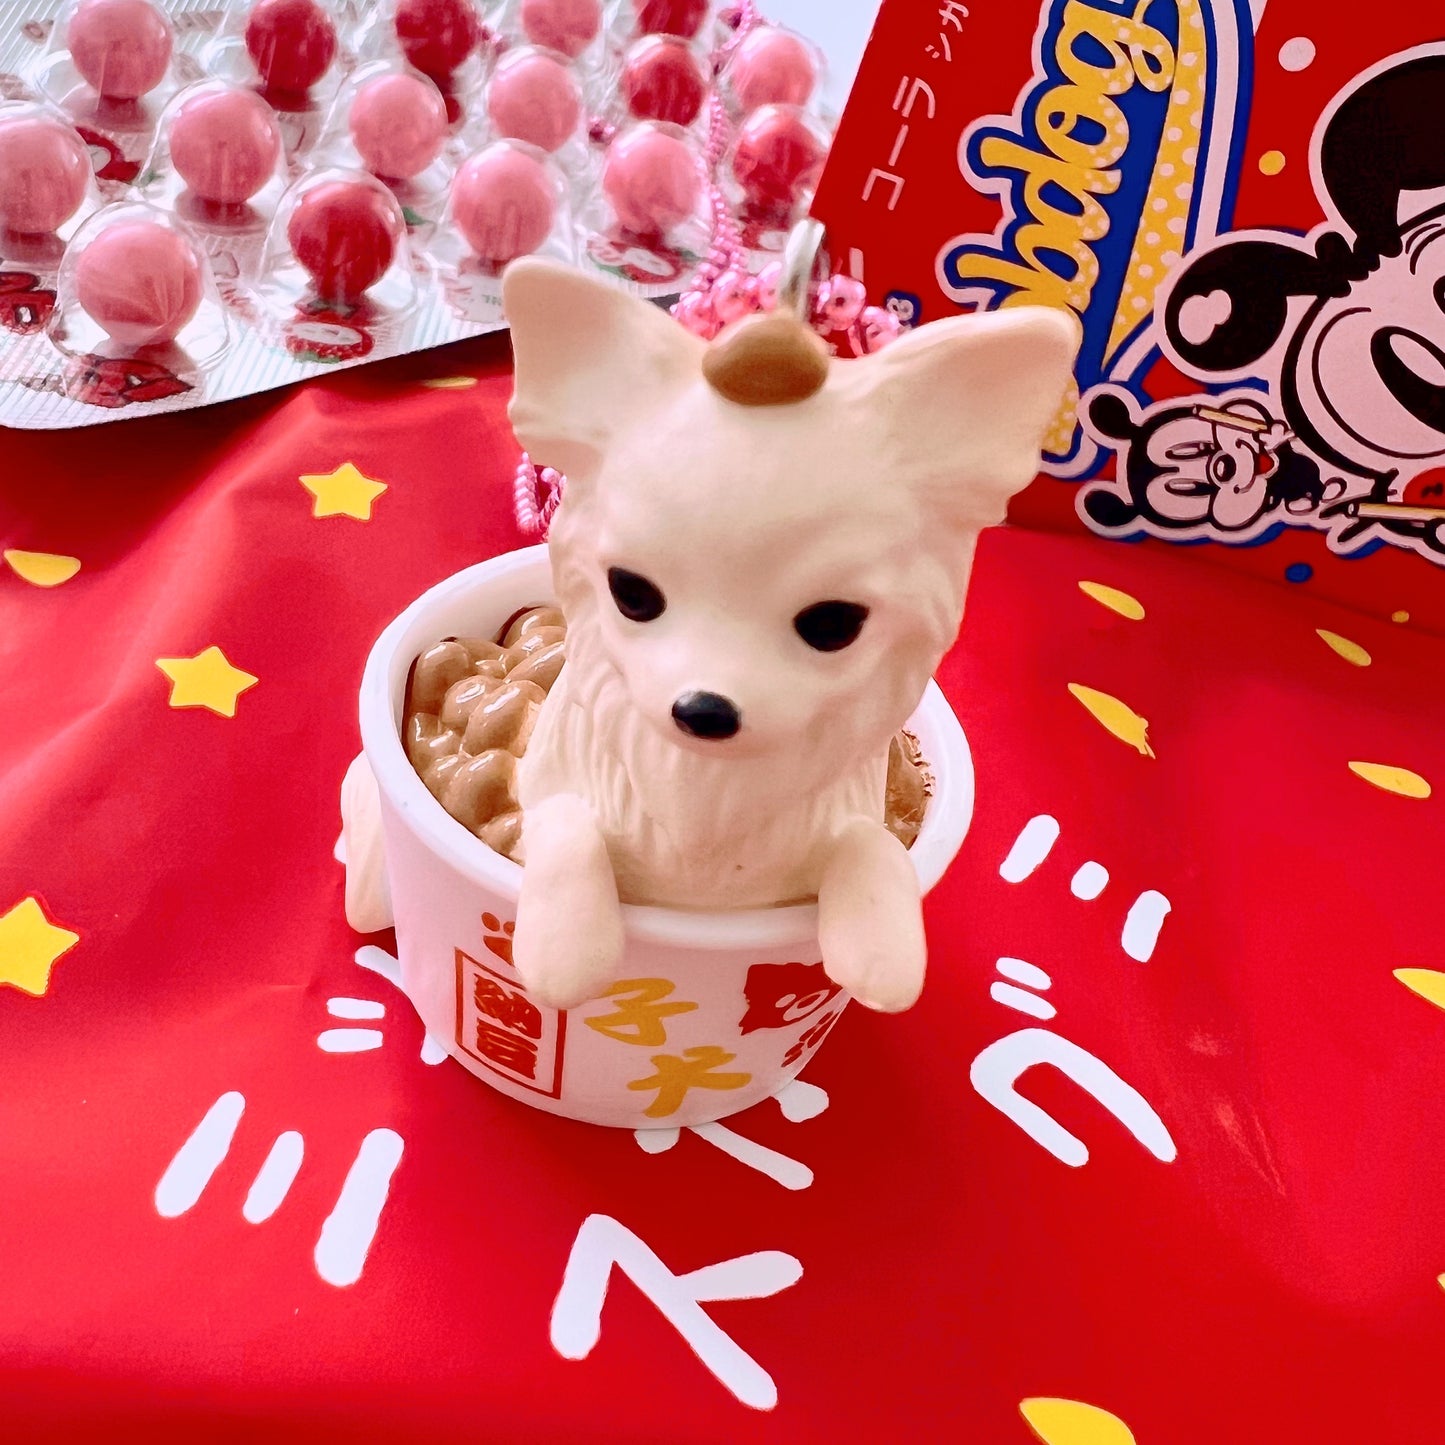 Ltd. Pop Cutie Chihuahua Take-out Necklace